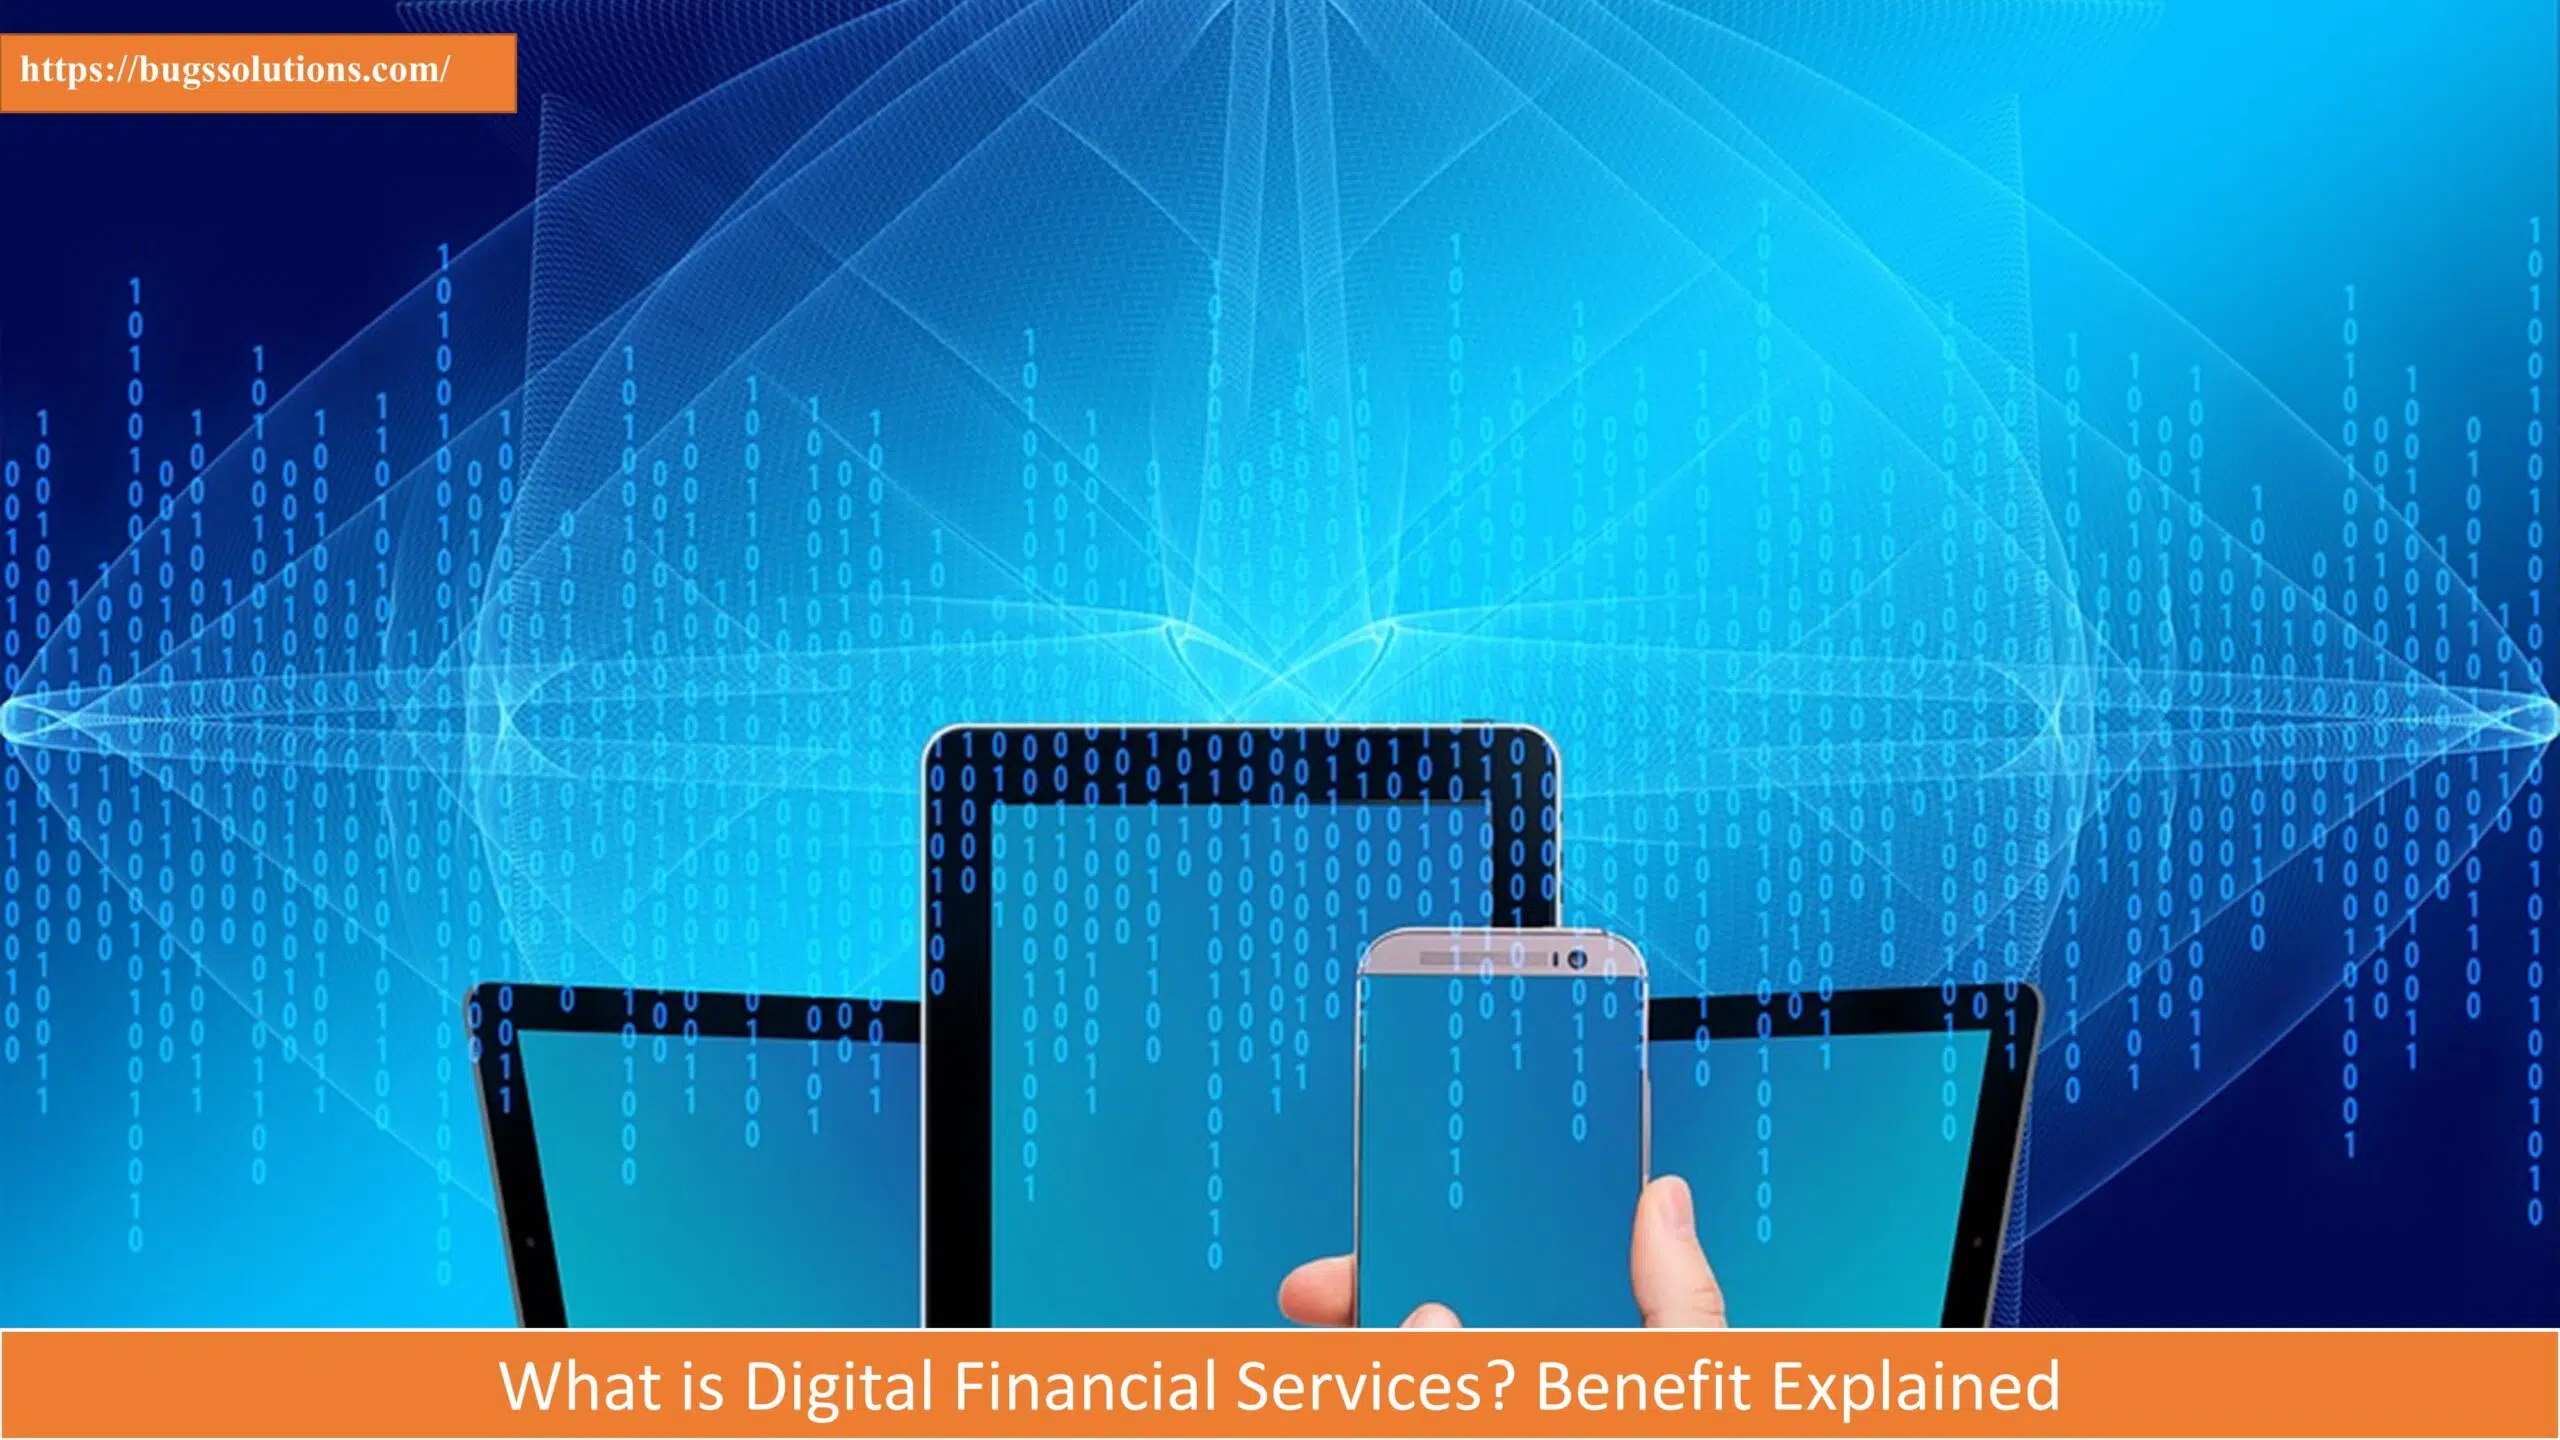 What is Digital Financial Services? Benefit Explained